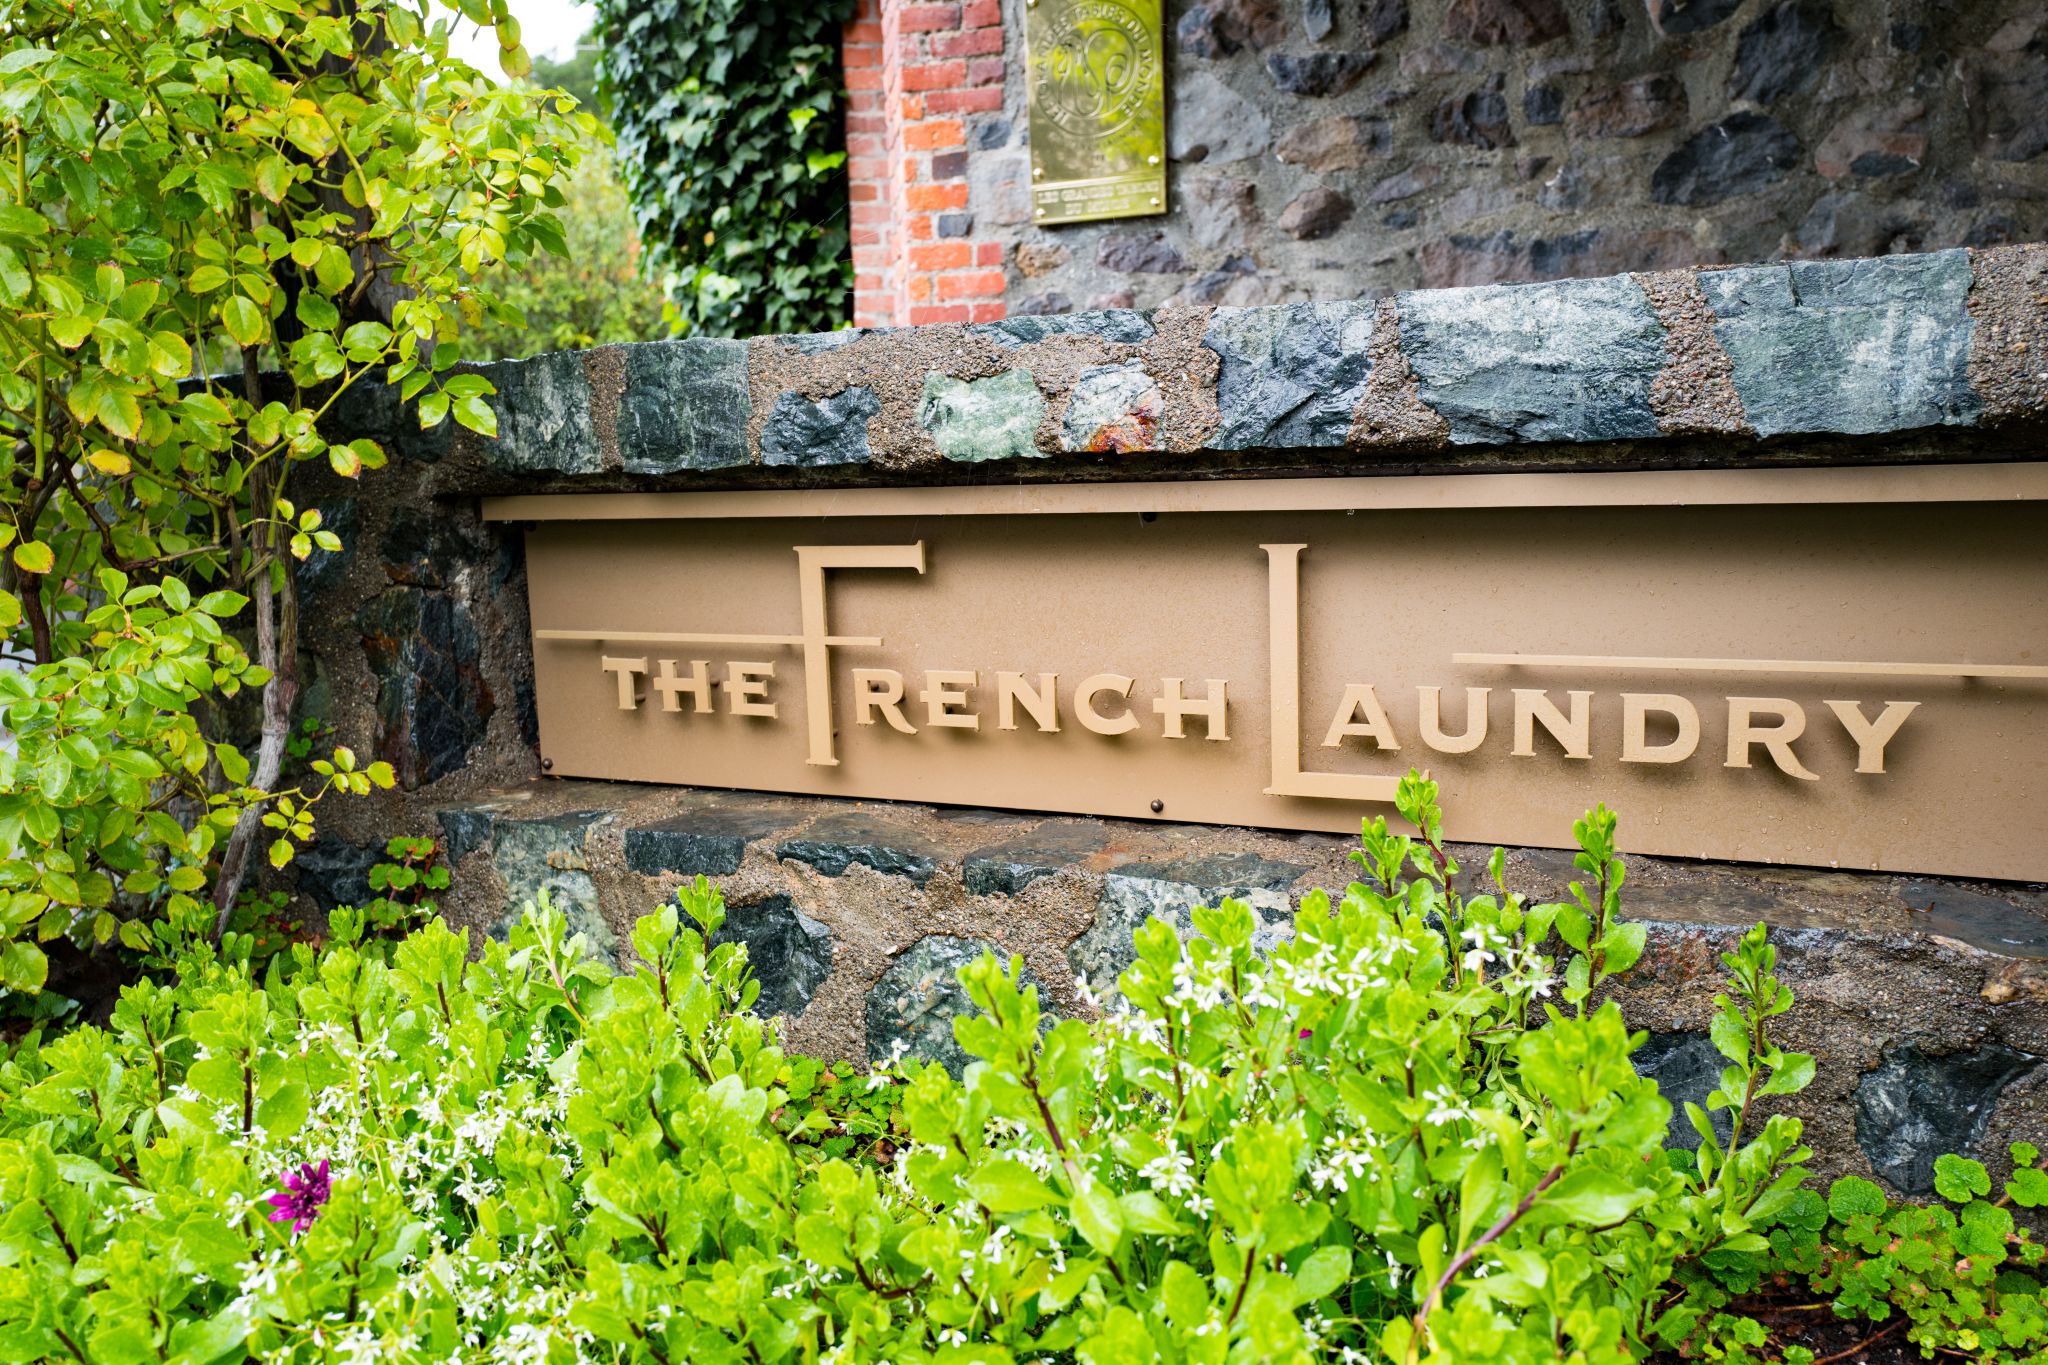 The French laundry is said to have received more than $ 4 2.4 million from the PPP fund